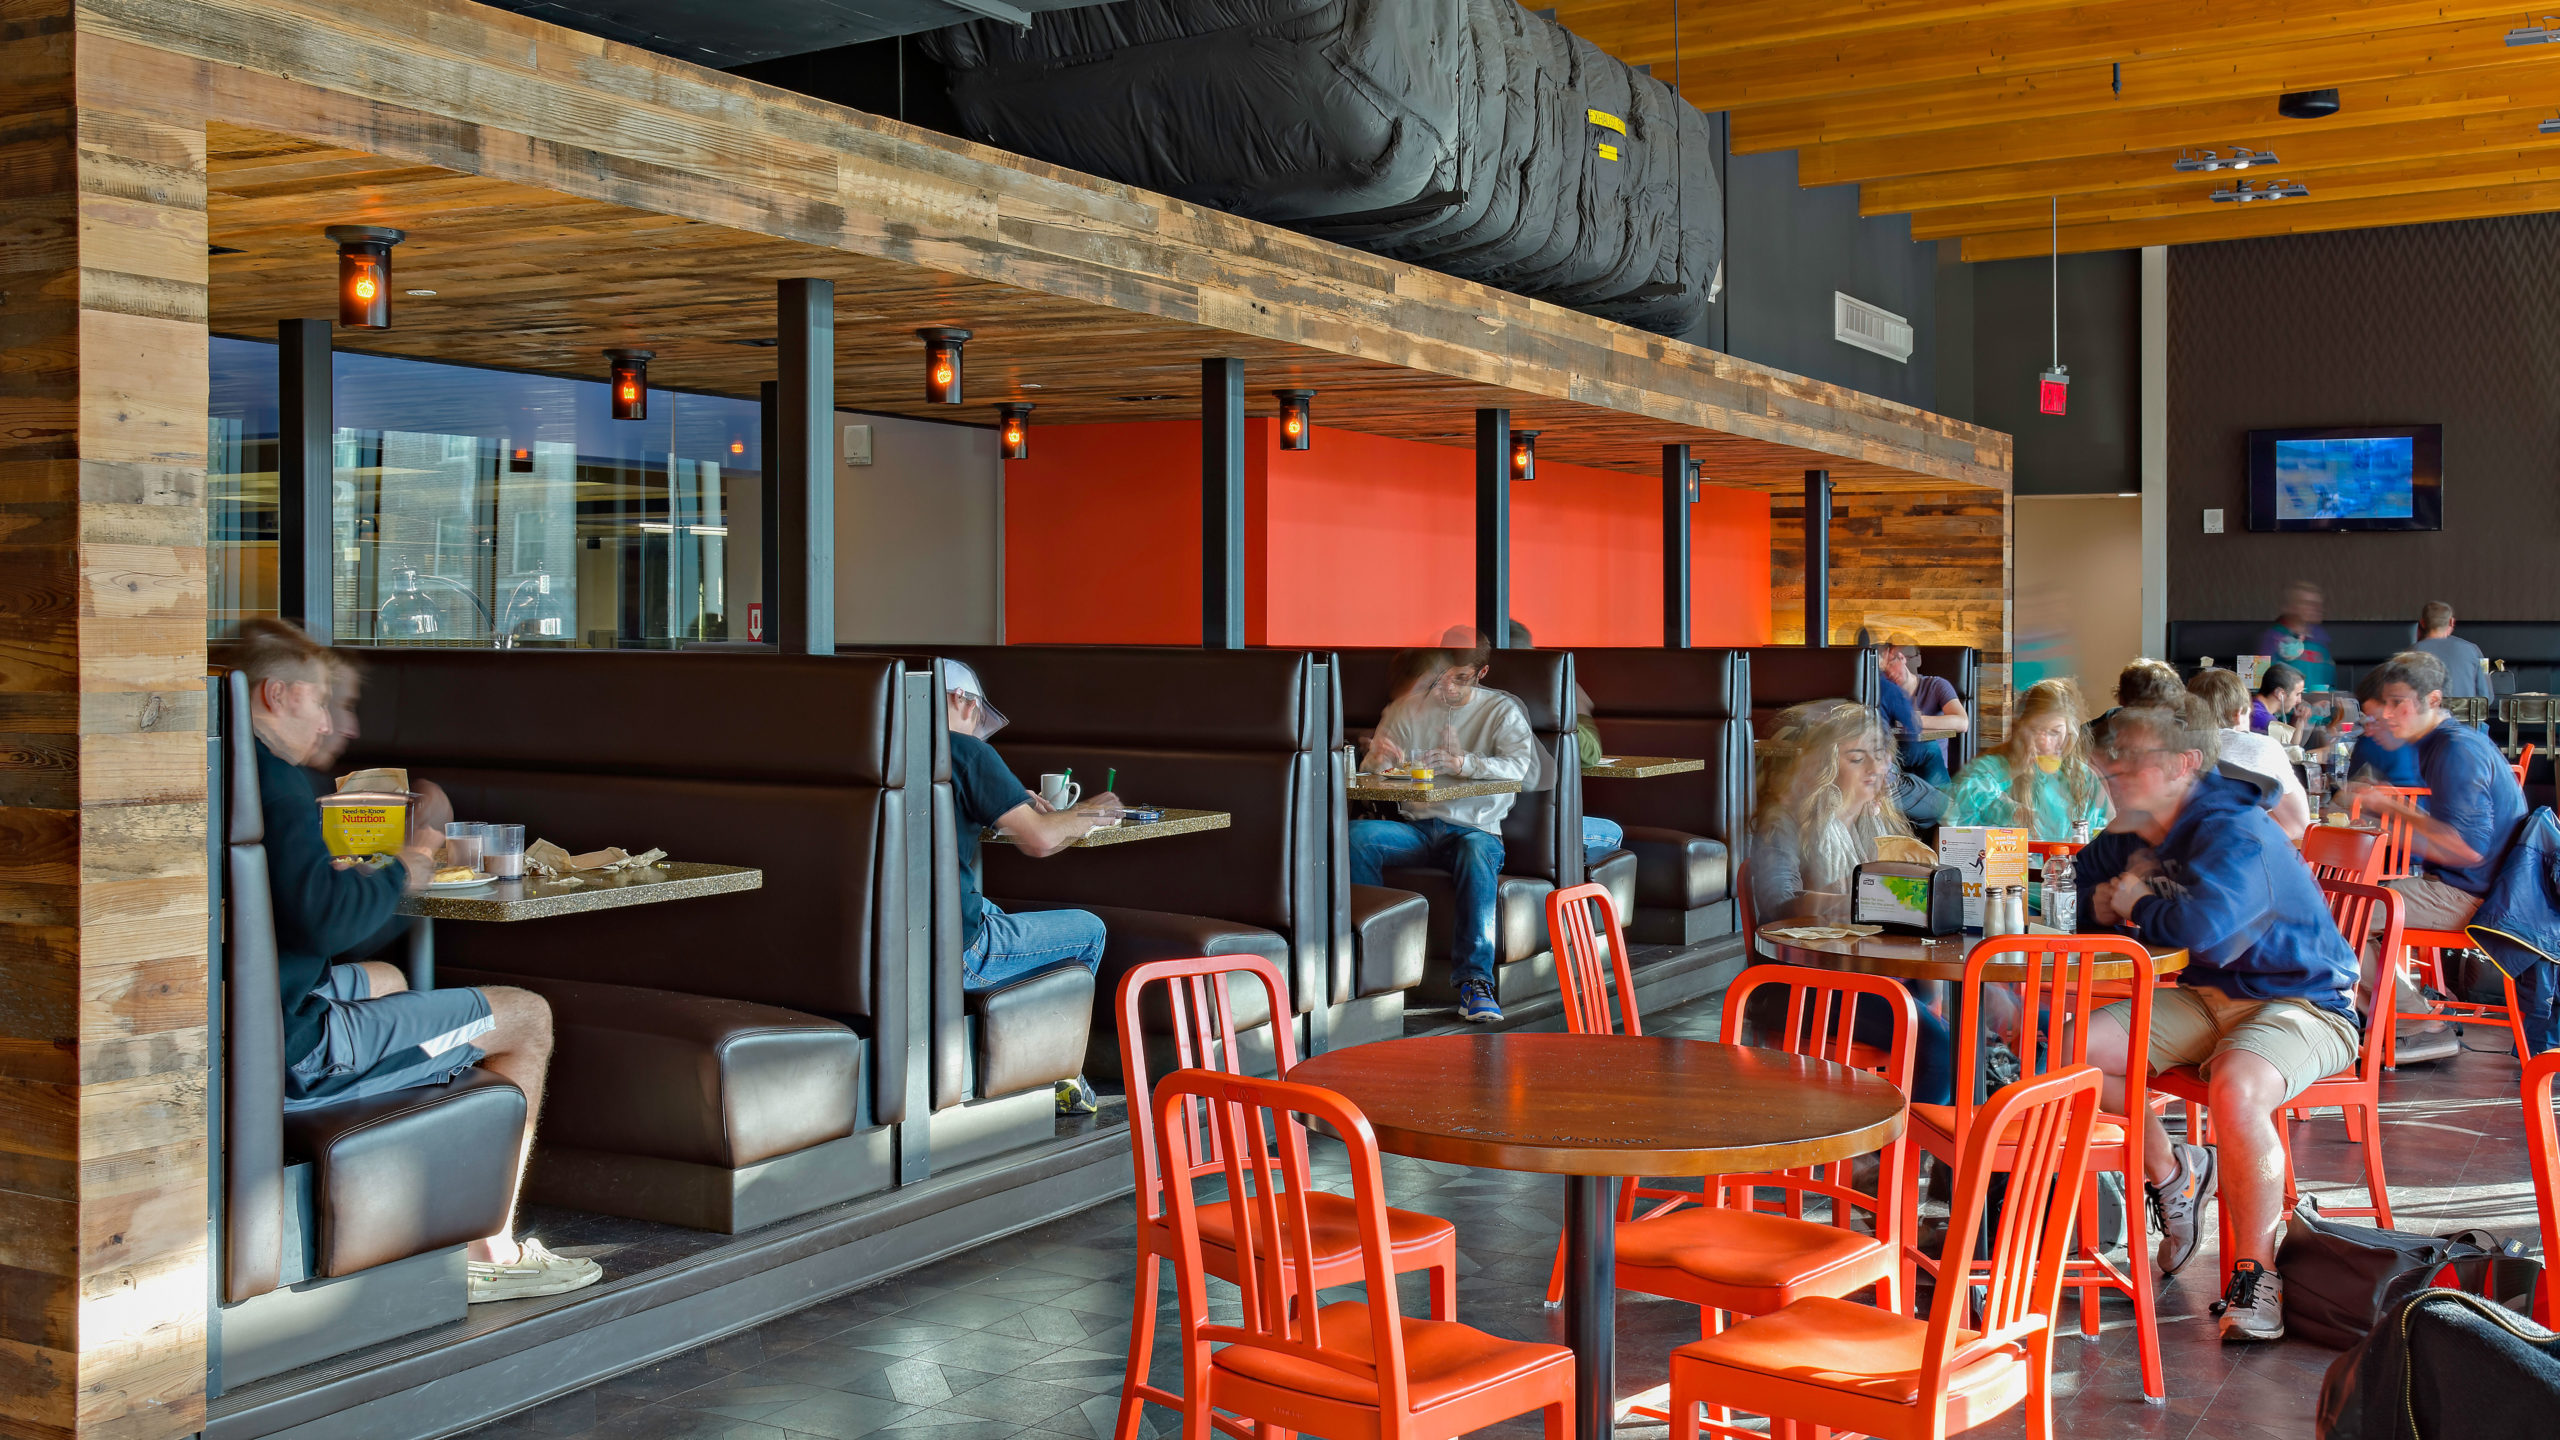 Milled barn wood wall paneling in a restaurant seating area.